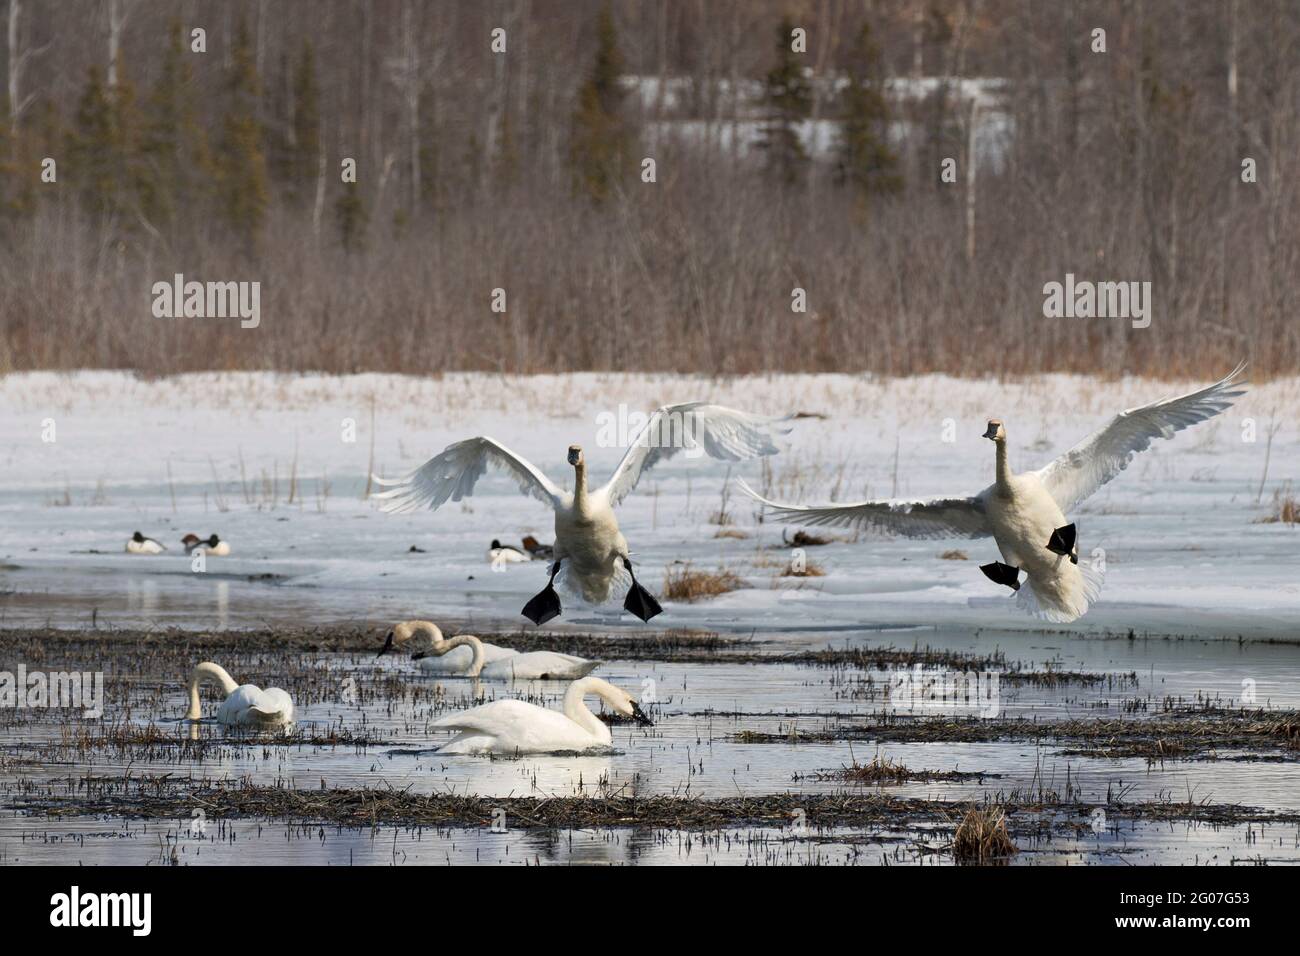 Trumpeter swans drop their landing gear to settle in with a group of swans and other waterfowl in Alaska's Palmer Flats State Game Refuge. Stock Photo